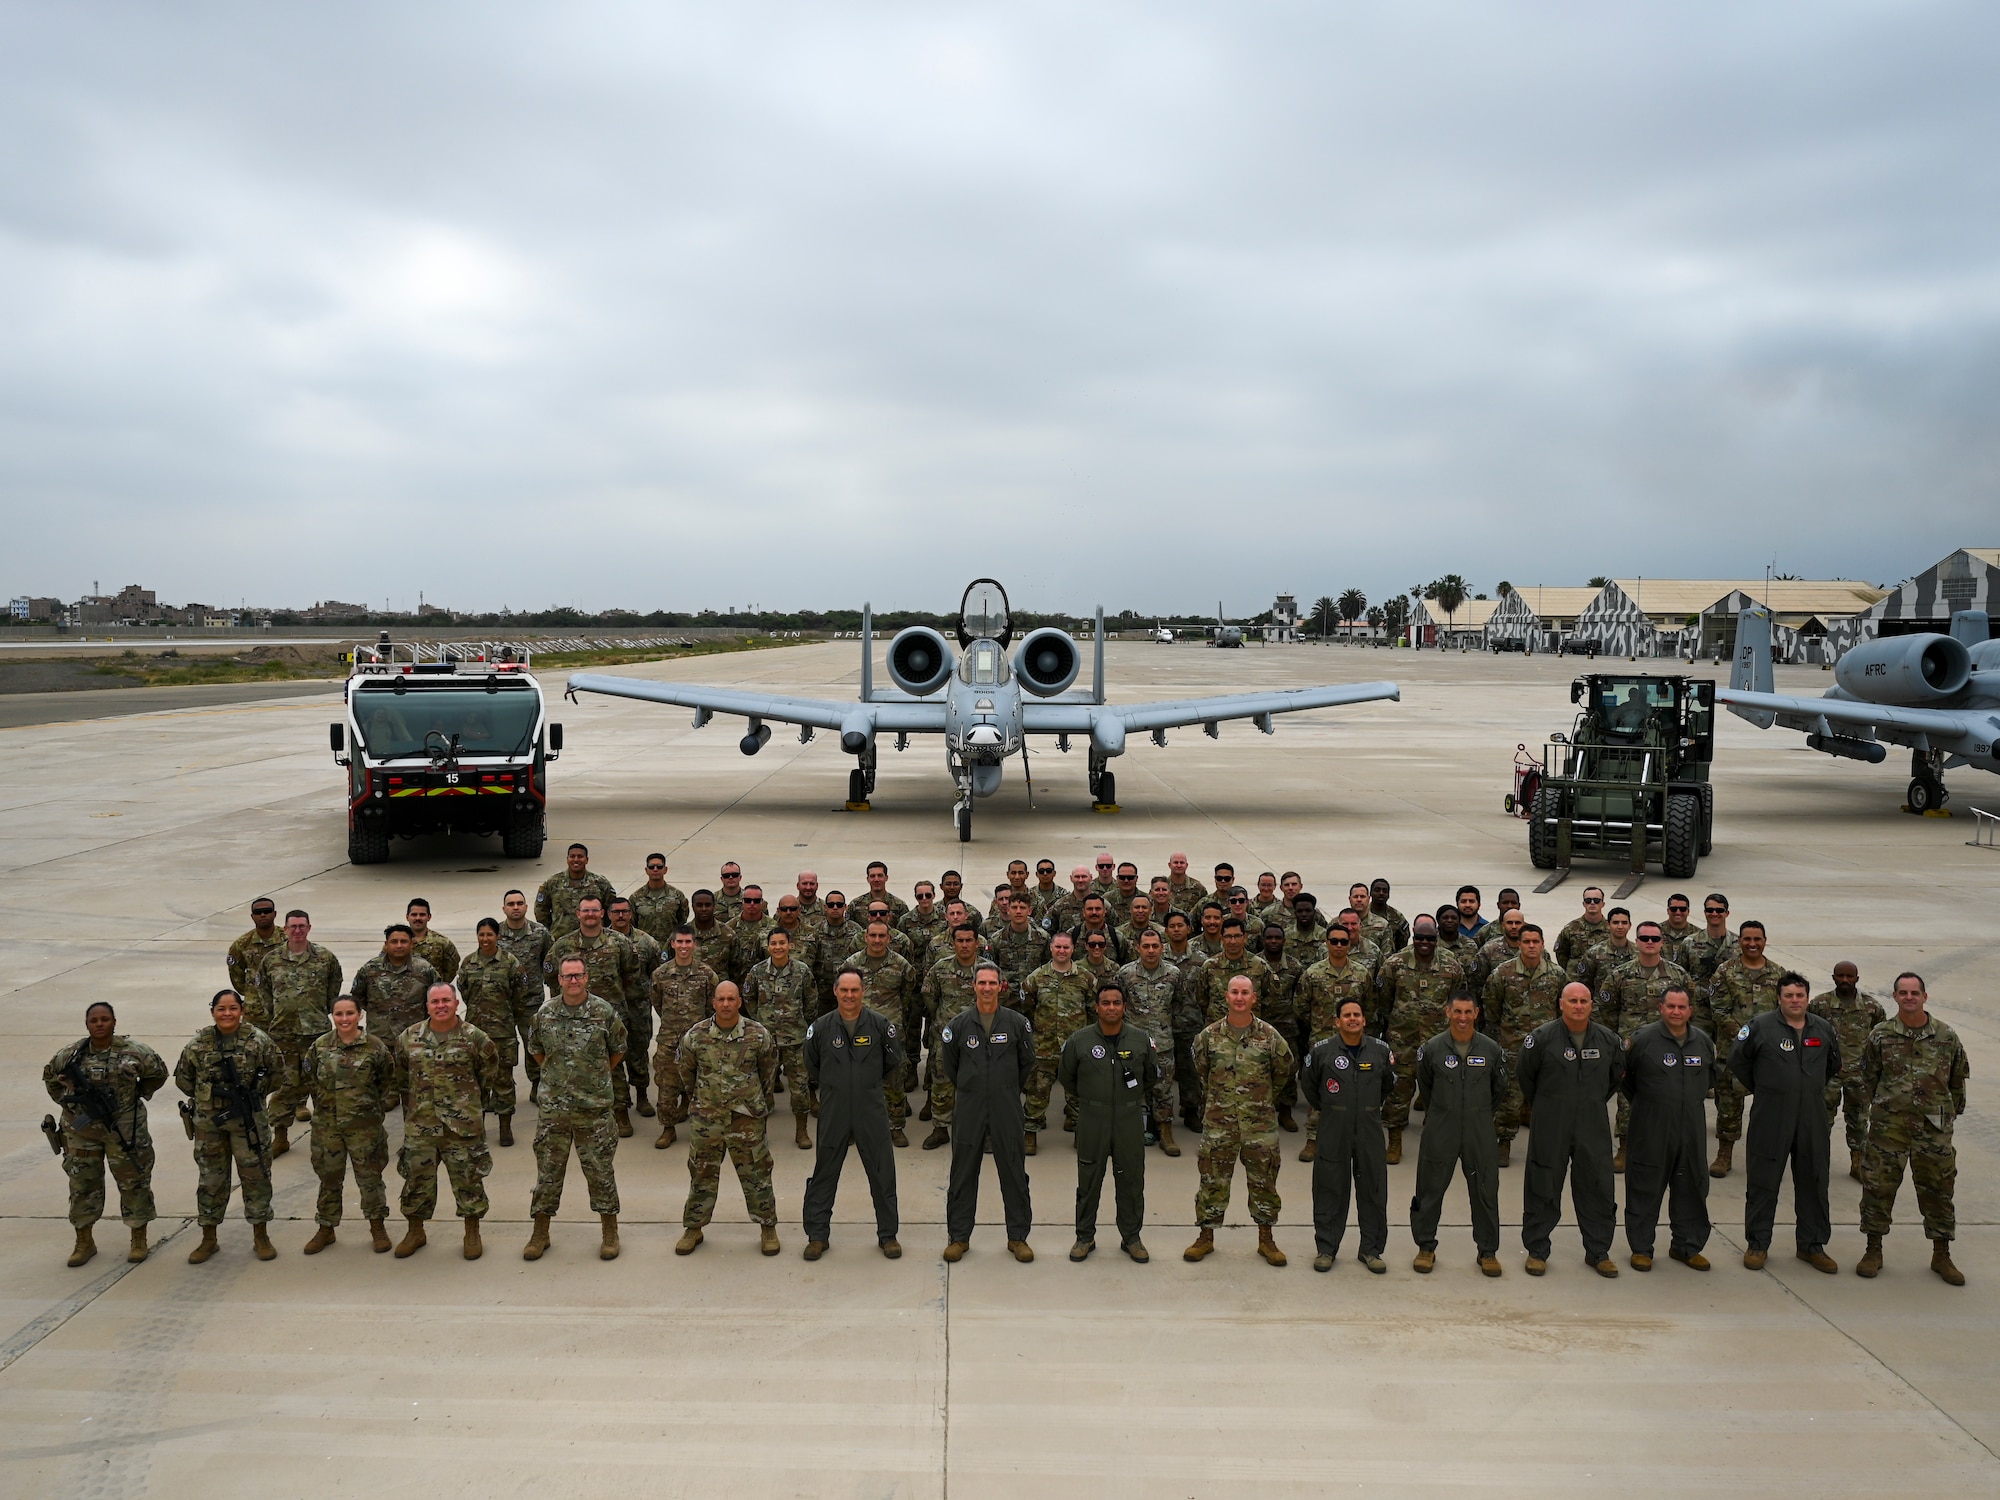 A formation of Airmen stand in front of (left to right) a fire truck, an A-10 attack aircraft, and a forklift.